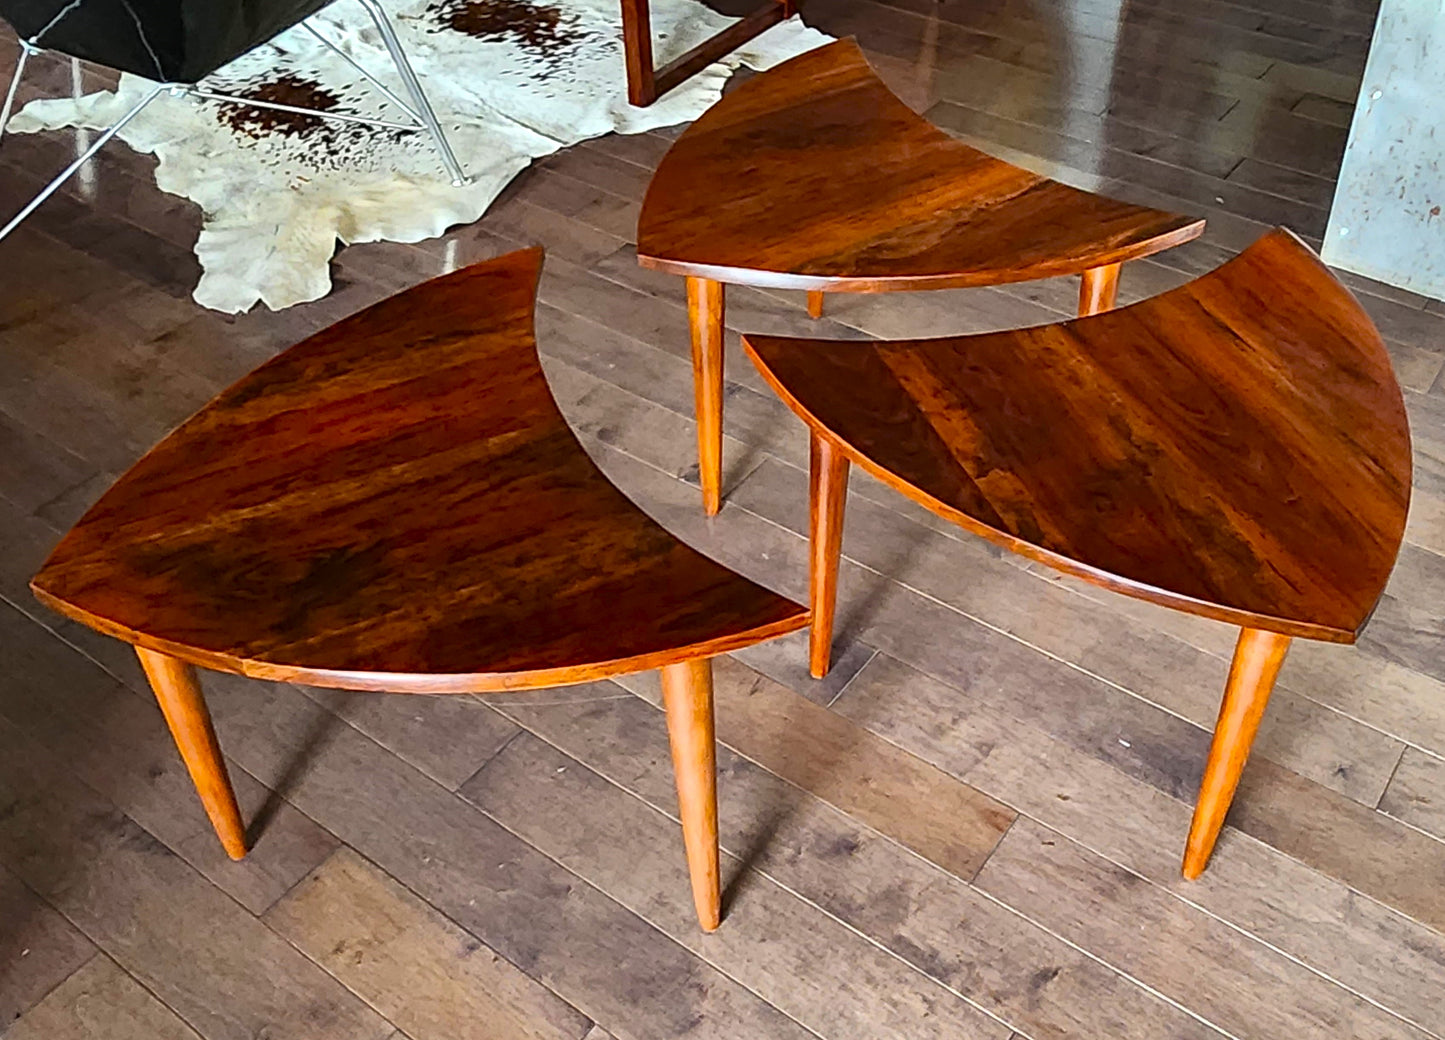 REFINISHED Mid Century Modern segmented triangular accent tables, set of 3